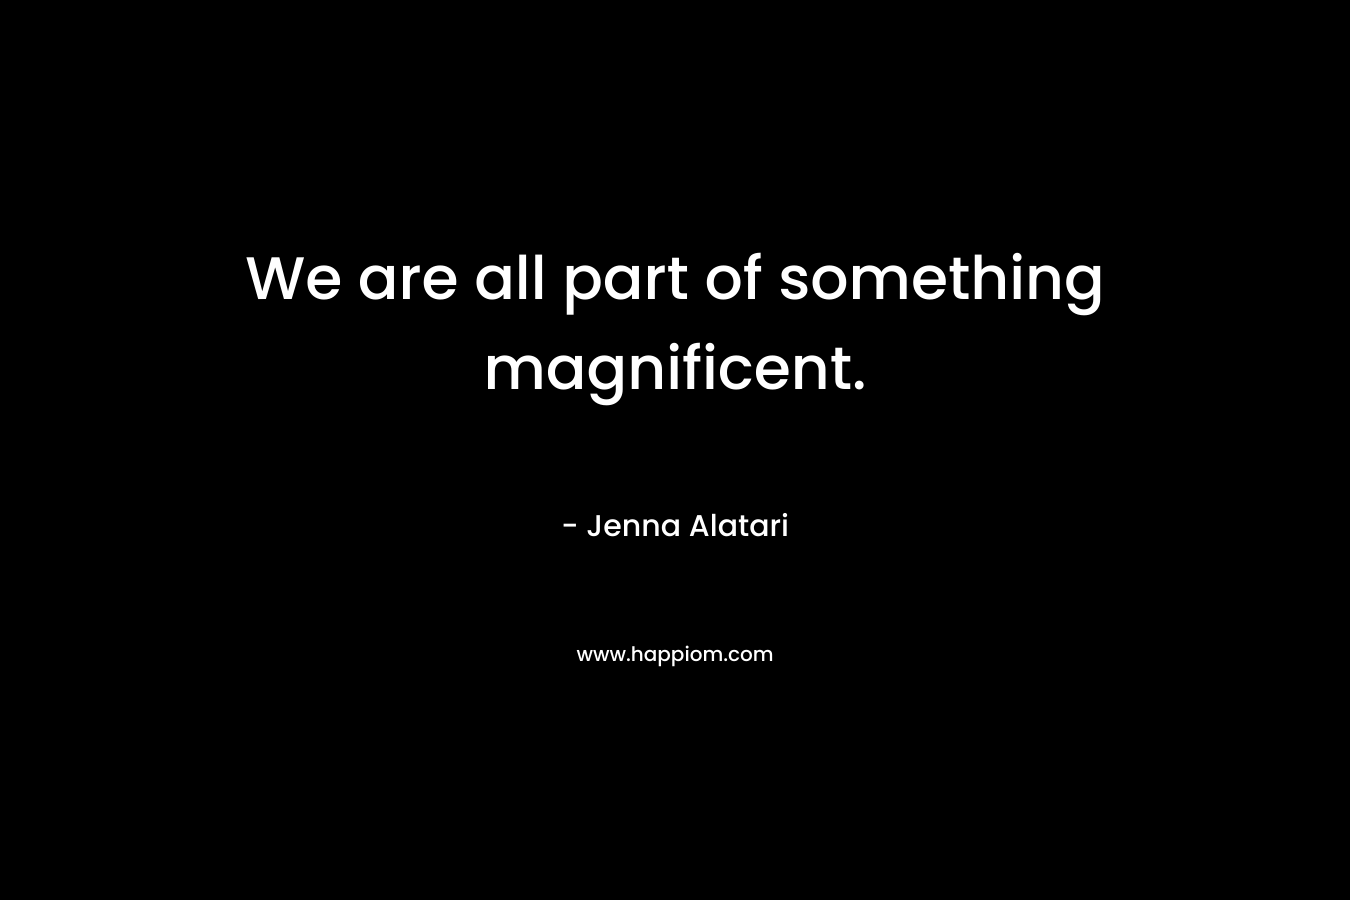 We are all part of something magnificent.